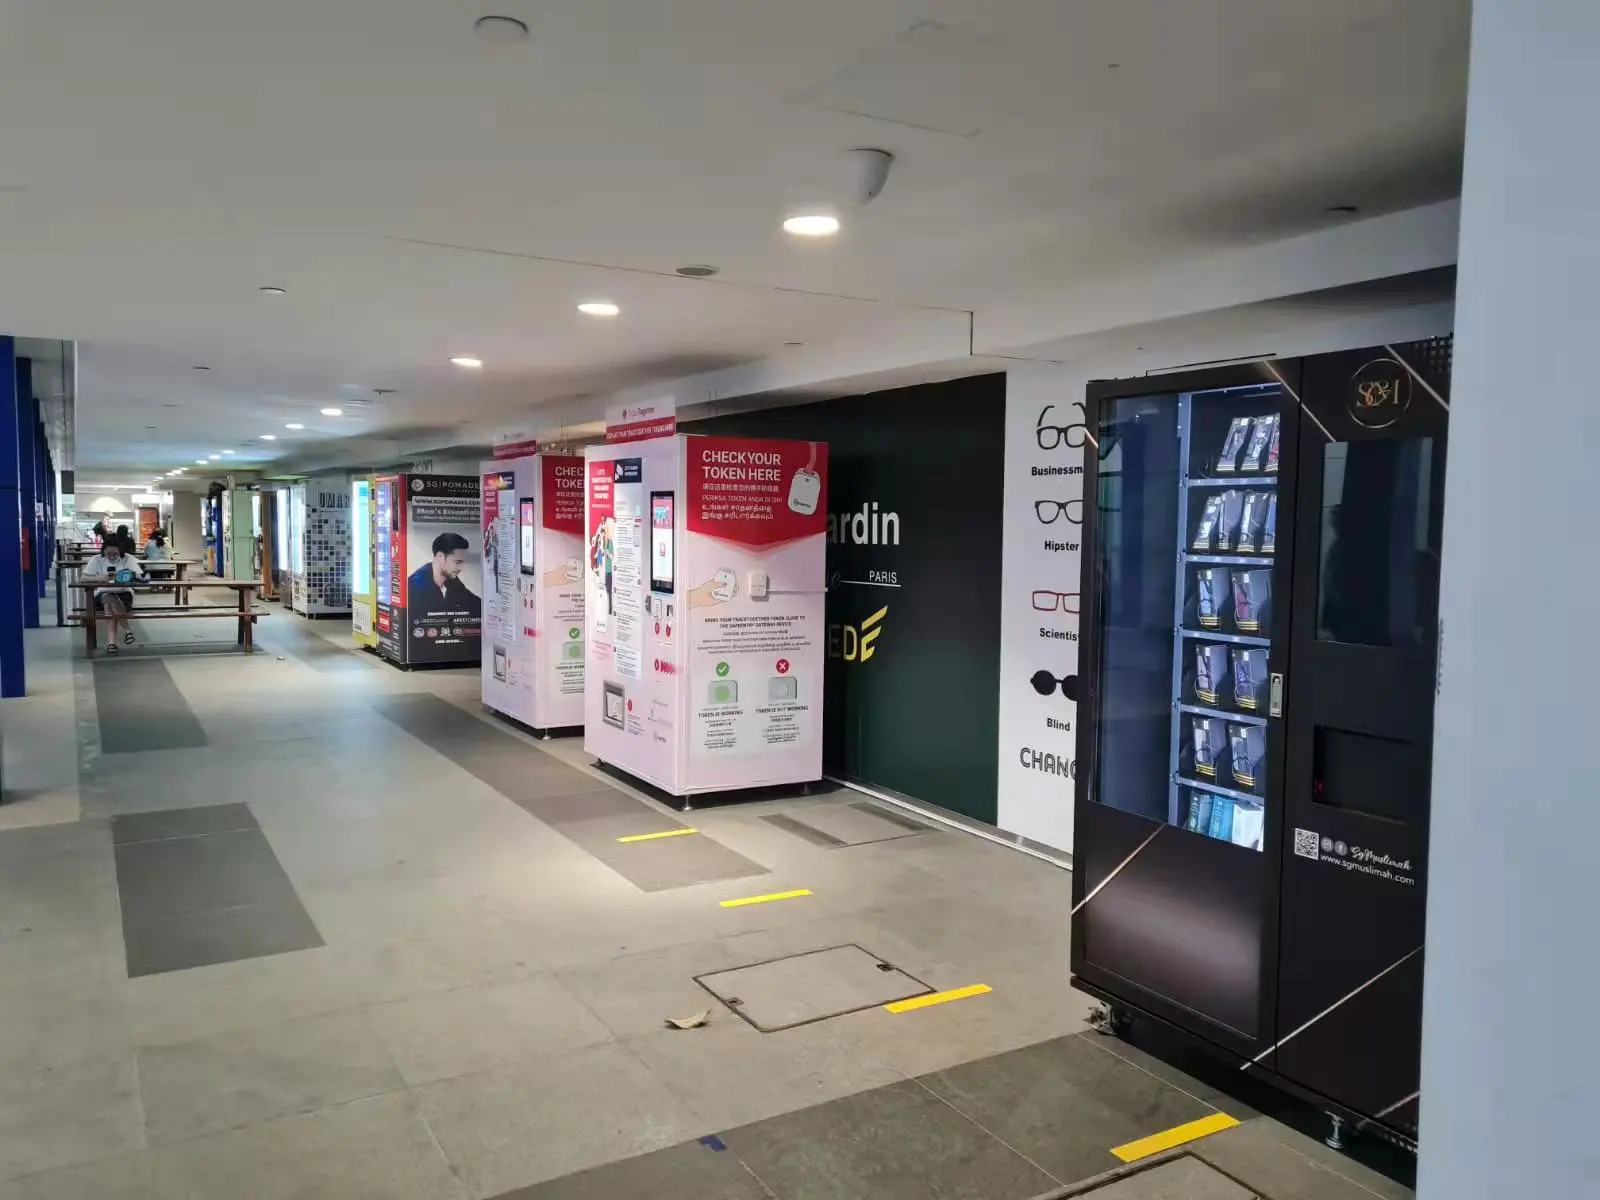 How to improve the desire to buy from vending machines?